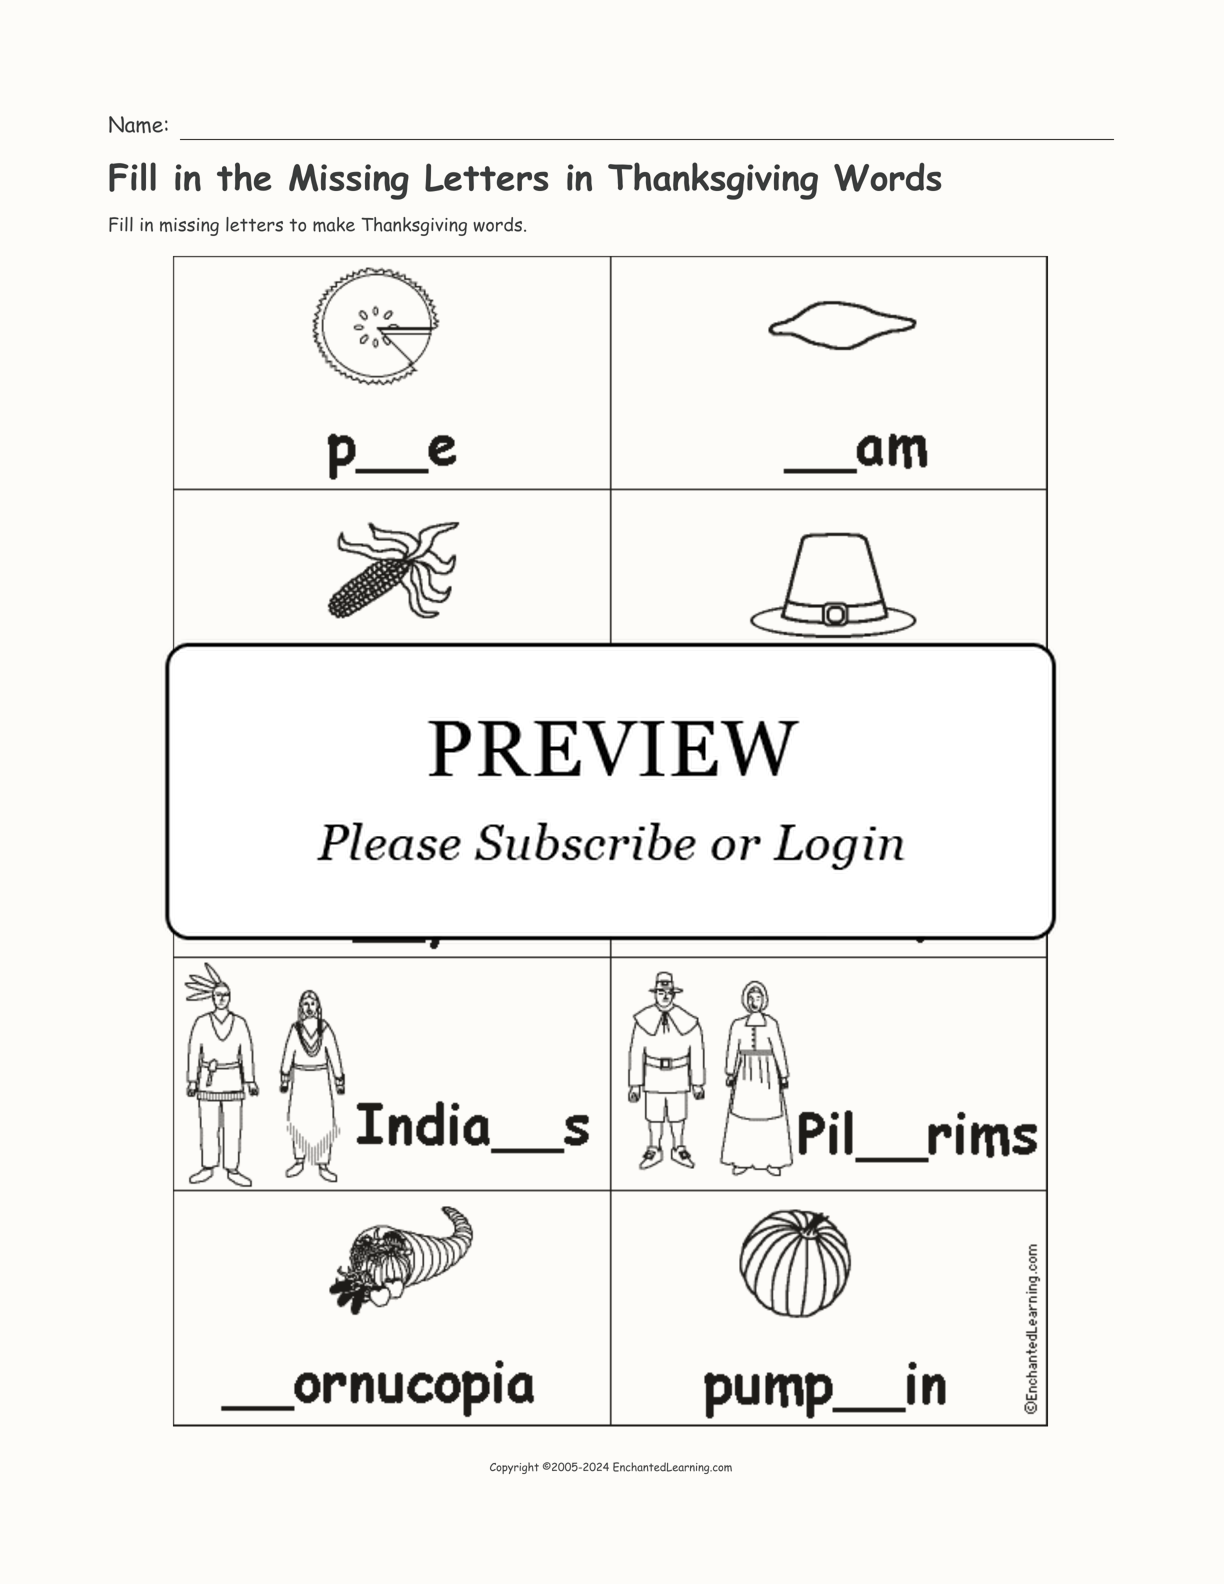 Fill in the Missing Letters in Thanksgiving Words interactive worksheet page 1